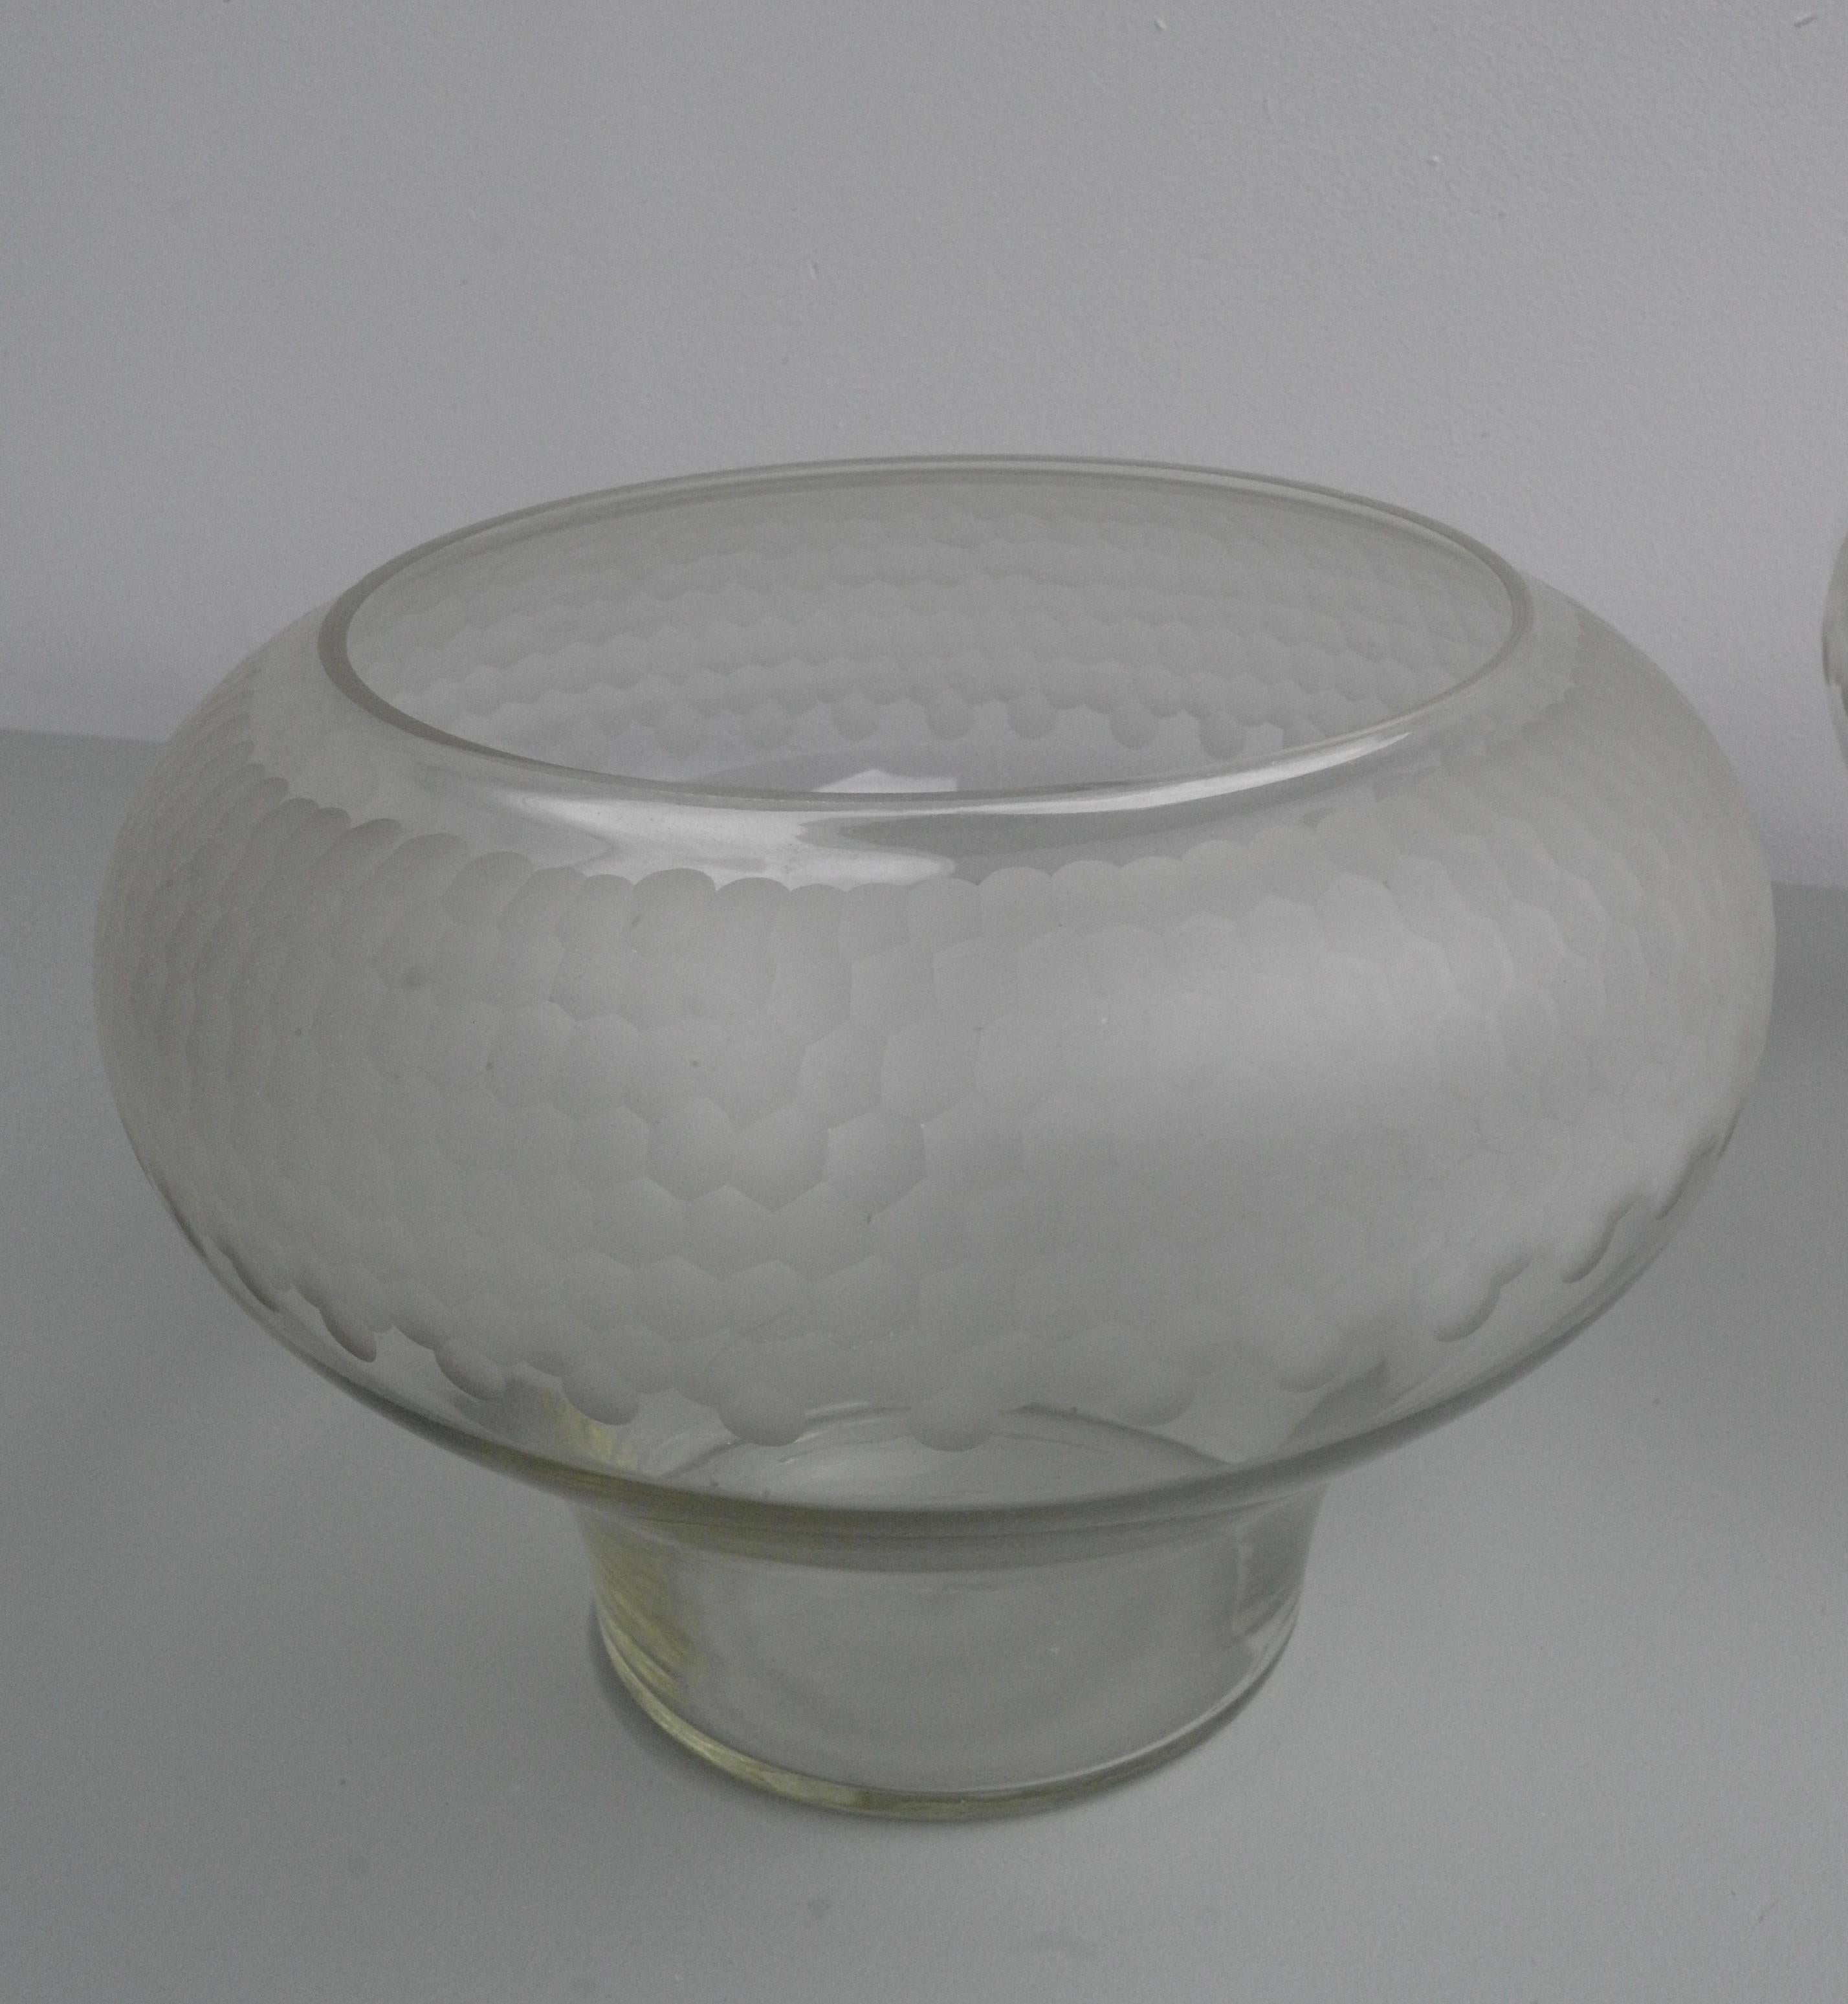 Pair of Large Decorative Honeycomb Midcentury Glass Bowl Vases For Sale 4